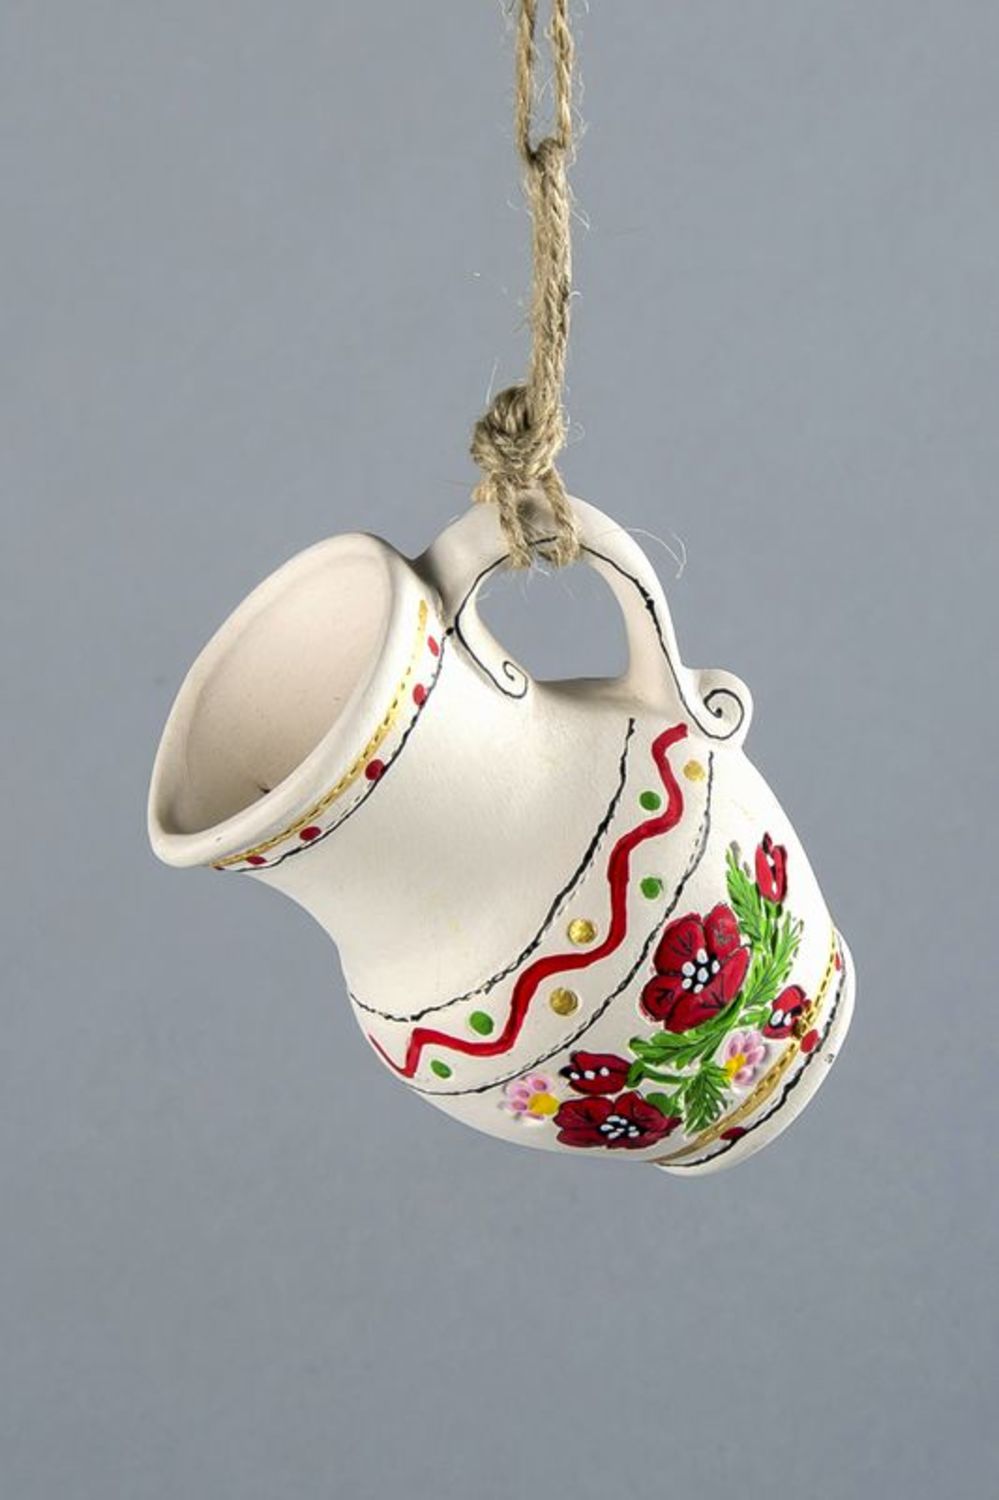 White clay decorative jug on a rope with floral décor 0,21 lb photo 1